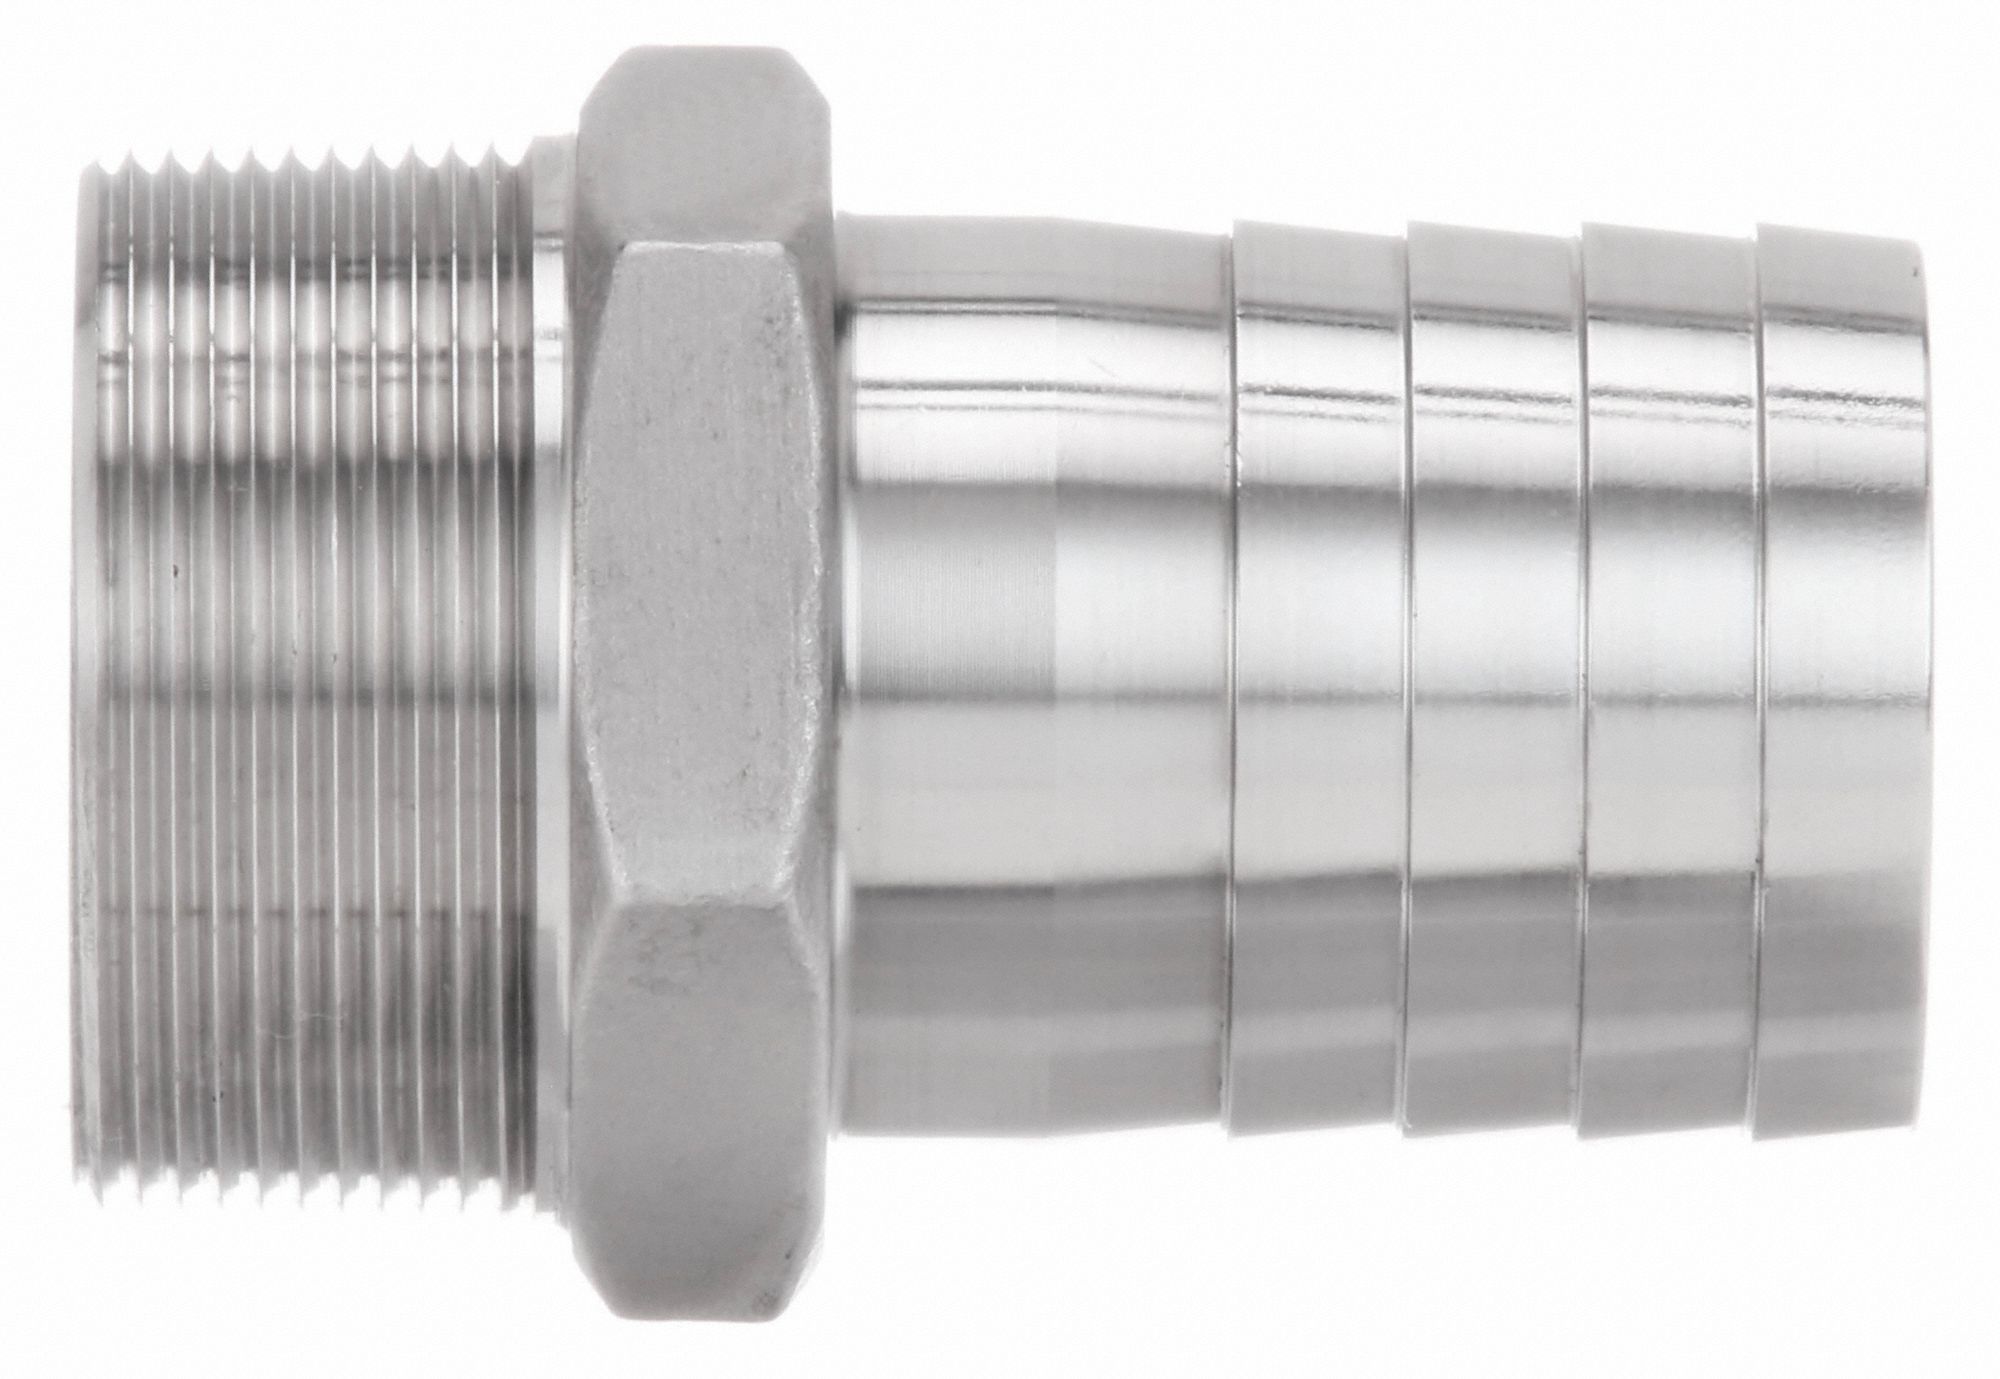 Stainless Hose Barb Fitting 1/2 Hose x 1/2 Male NPT 